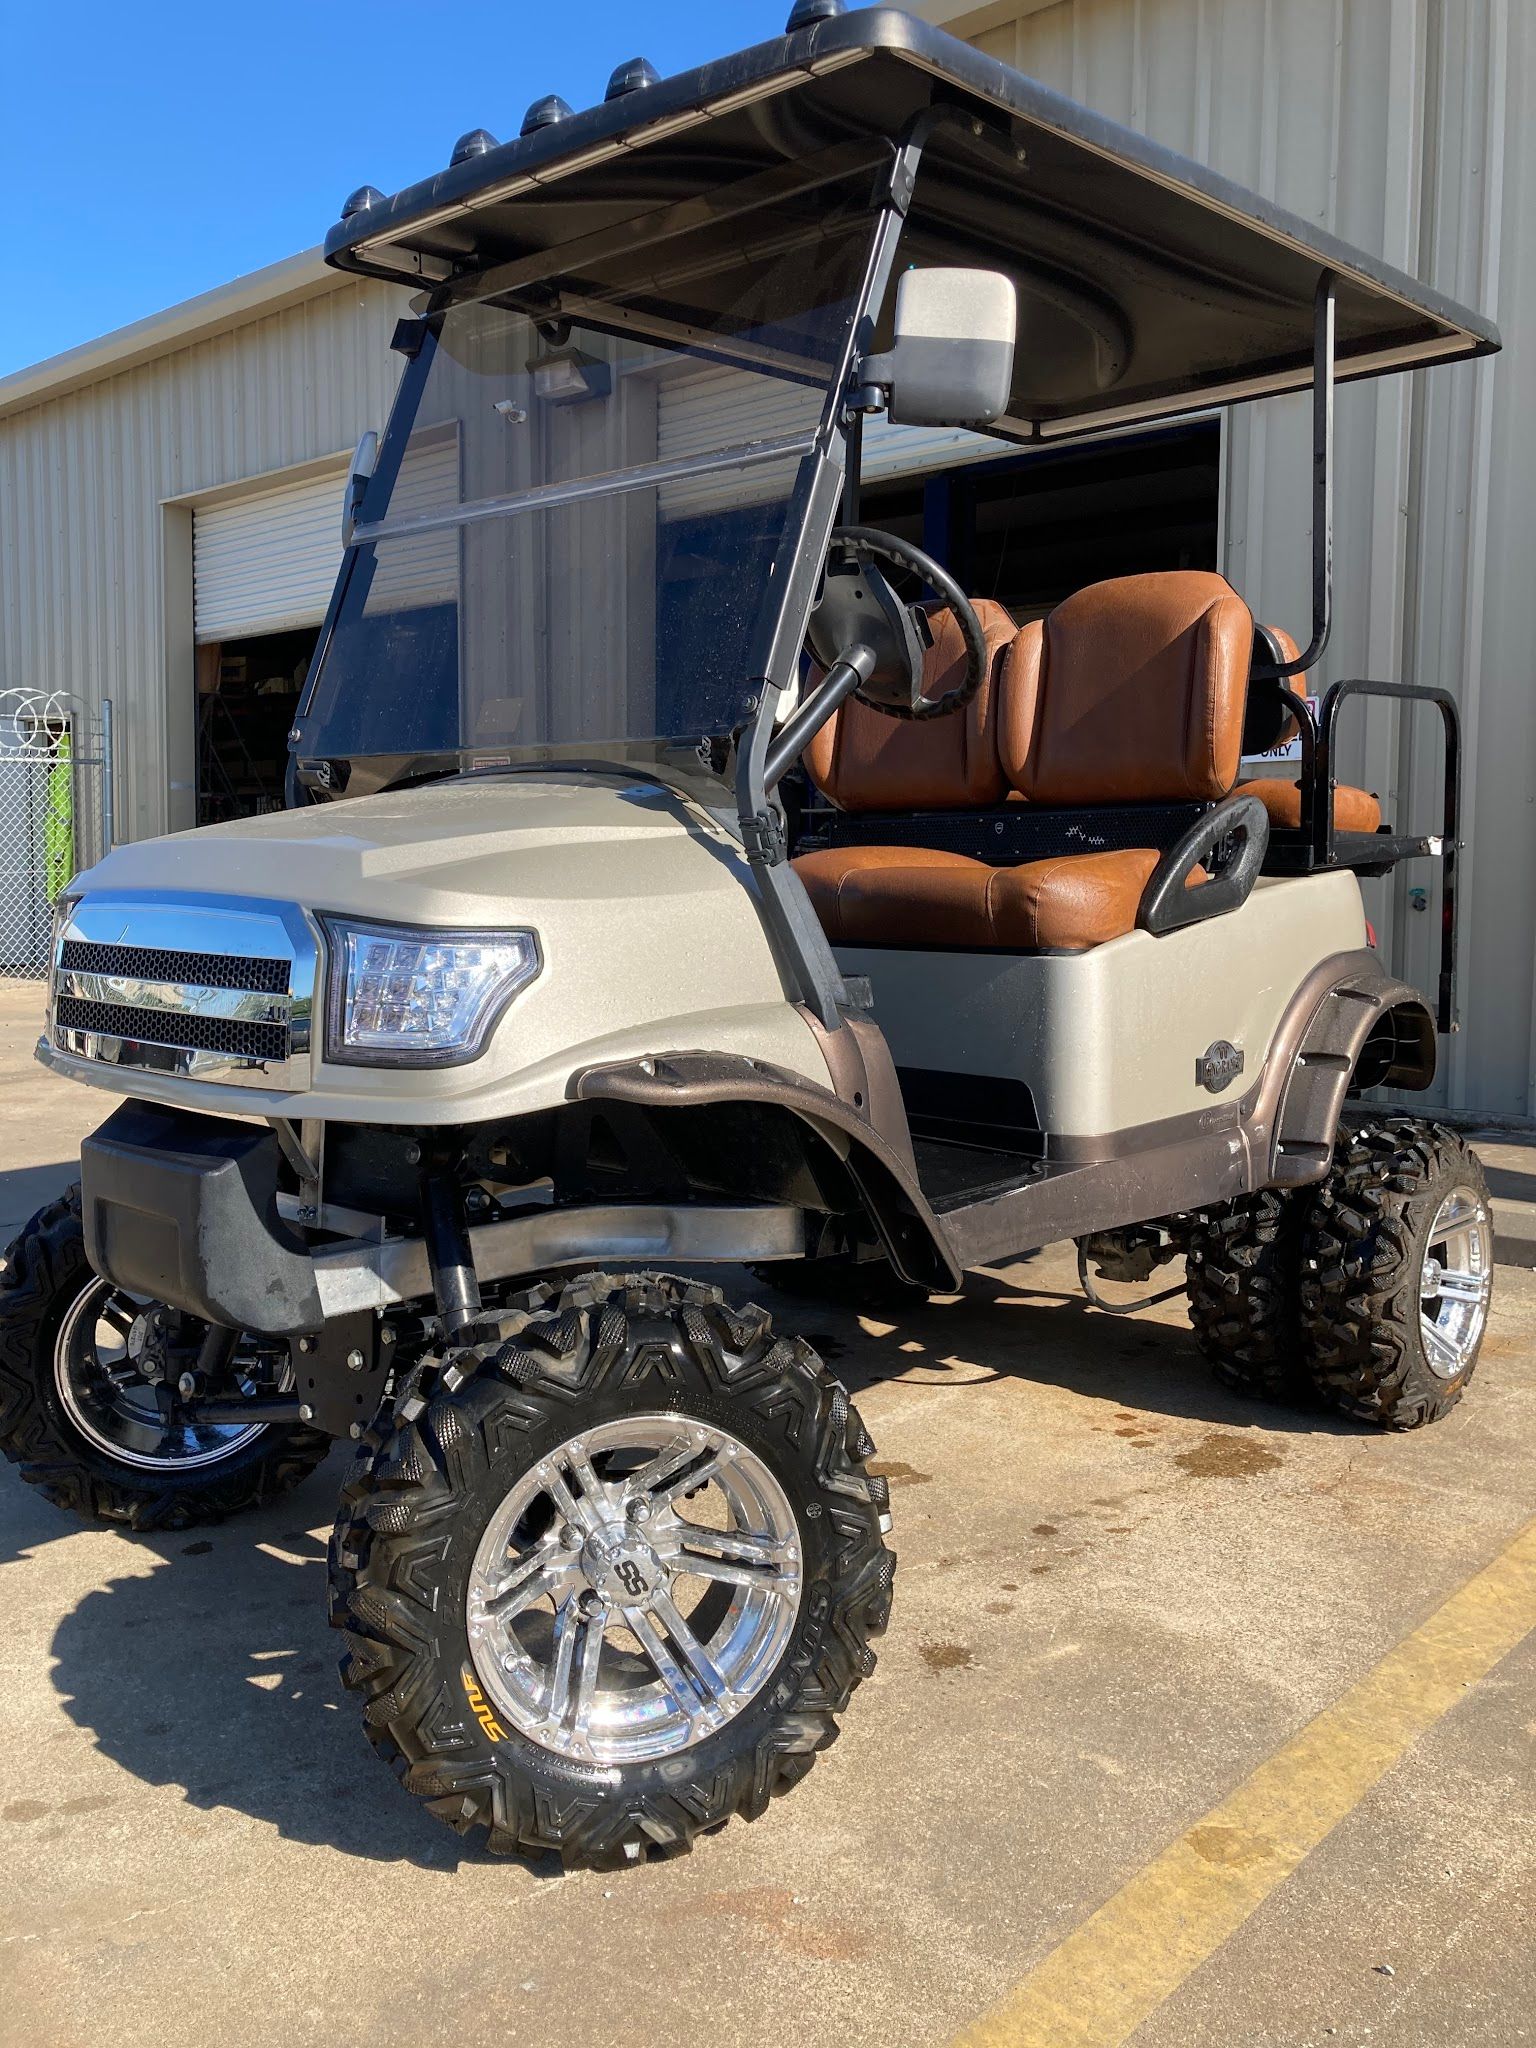 Services & Products Golf Cars Unlimited Lake Charles in Lake Charles LA